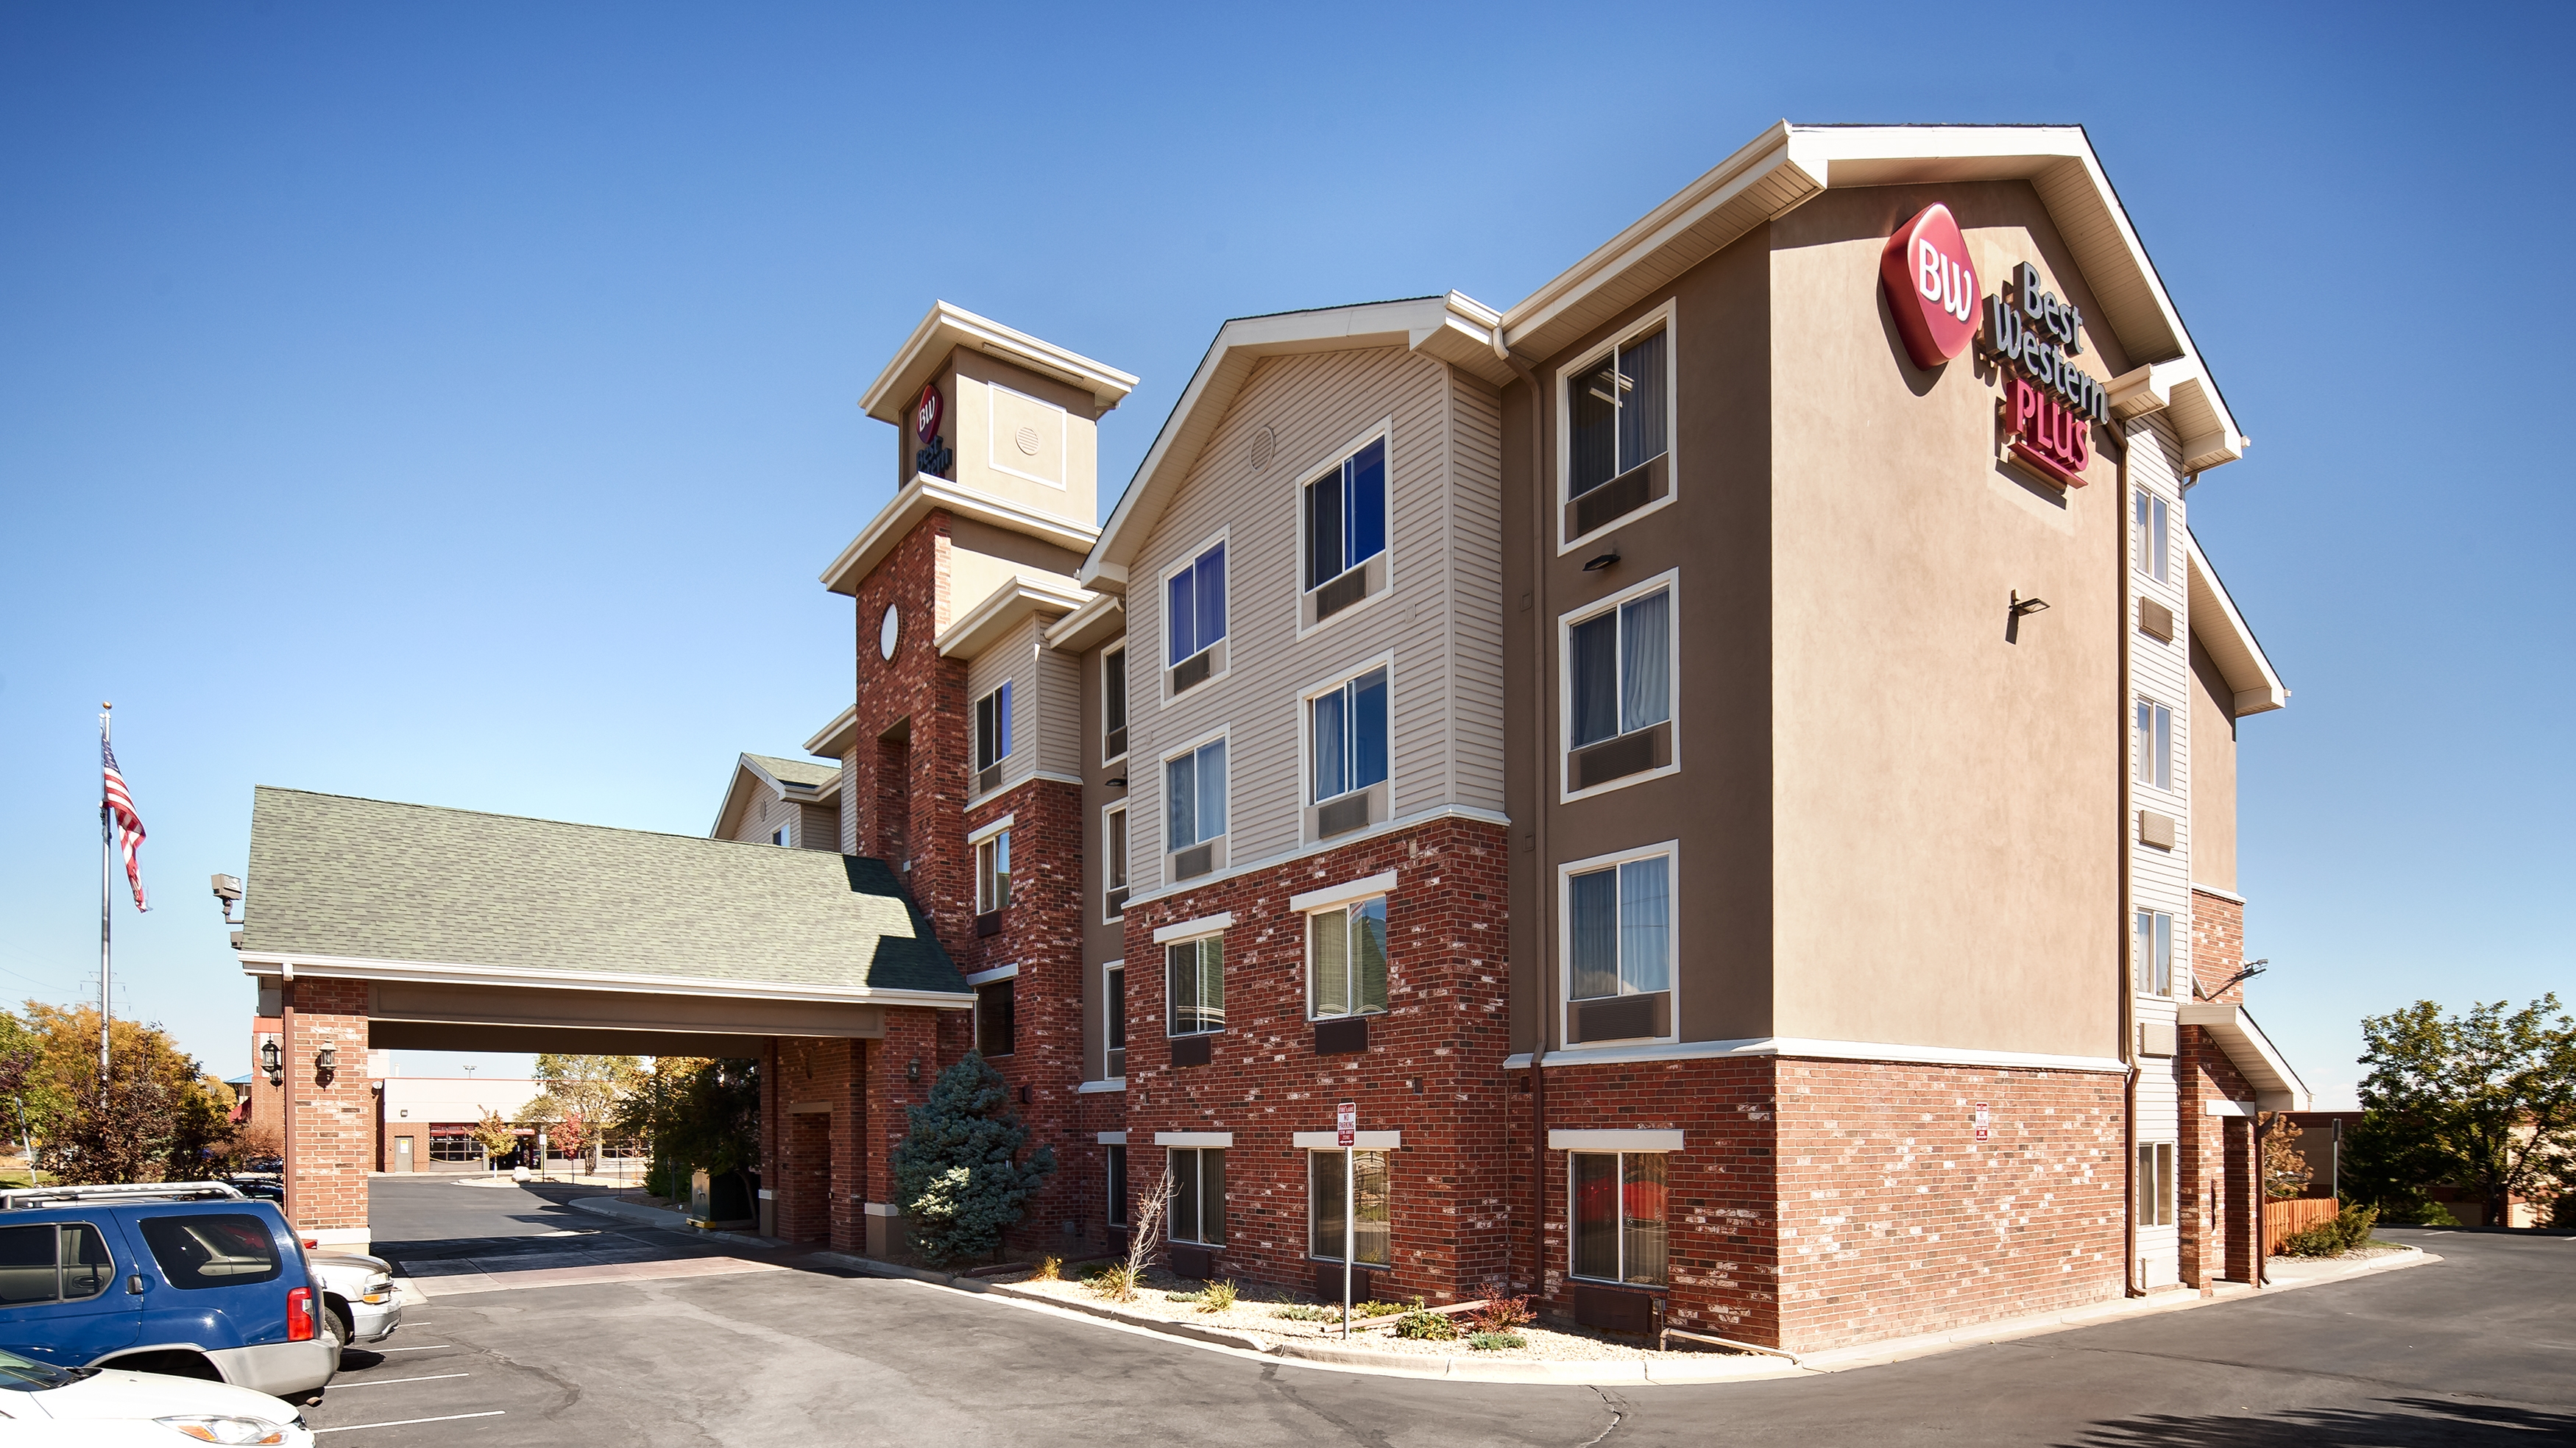 Best Western eliminates paper authorizations with Sertifi